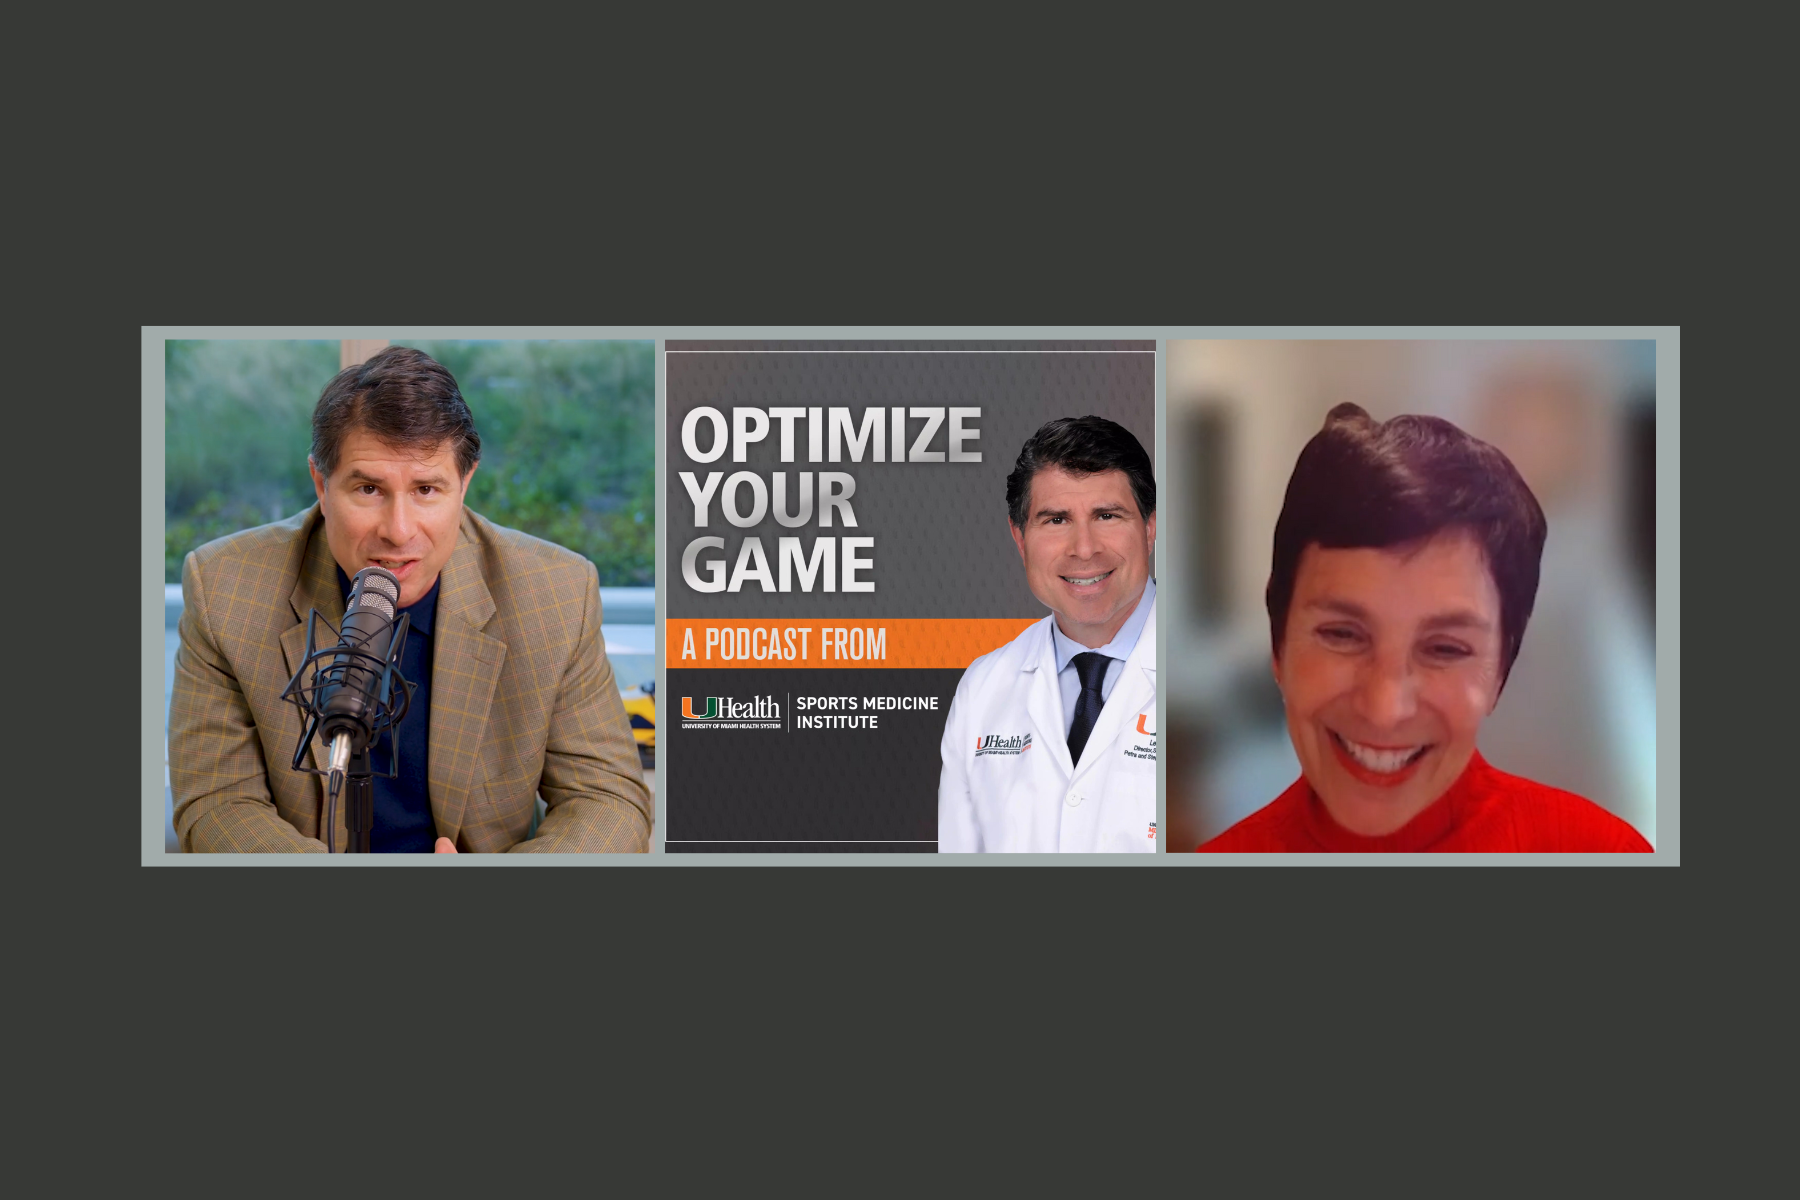 Dr. Kaplan hosts the podcast Optimize Your Game.